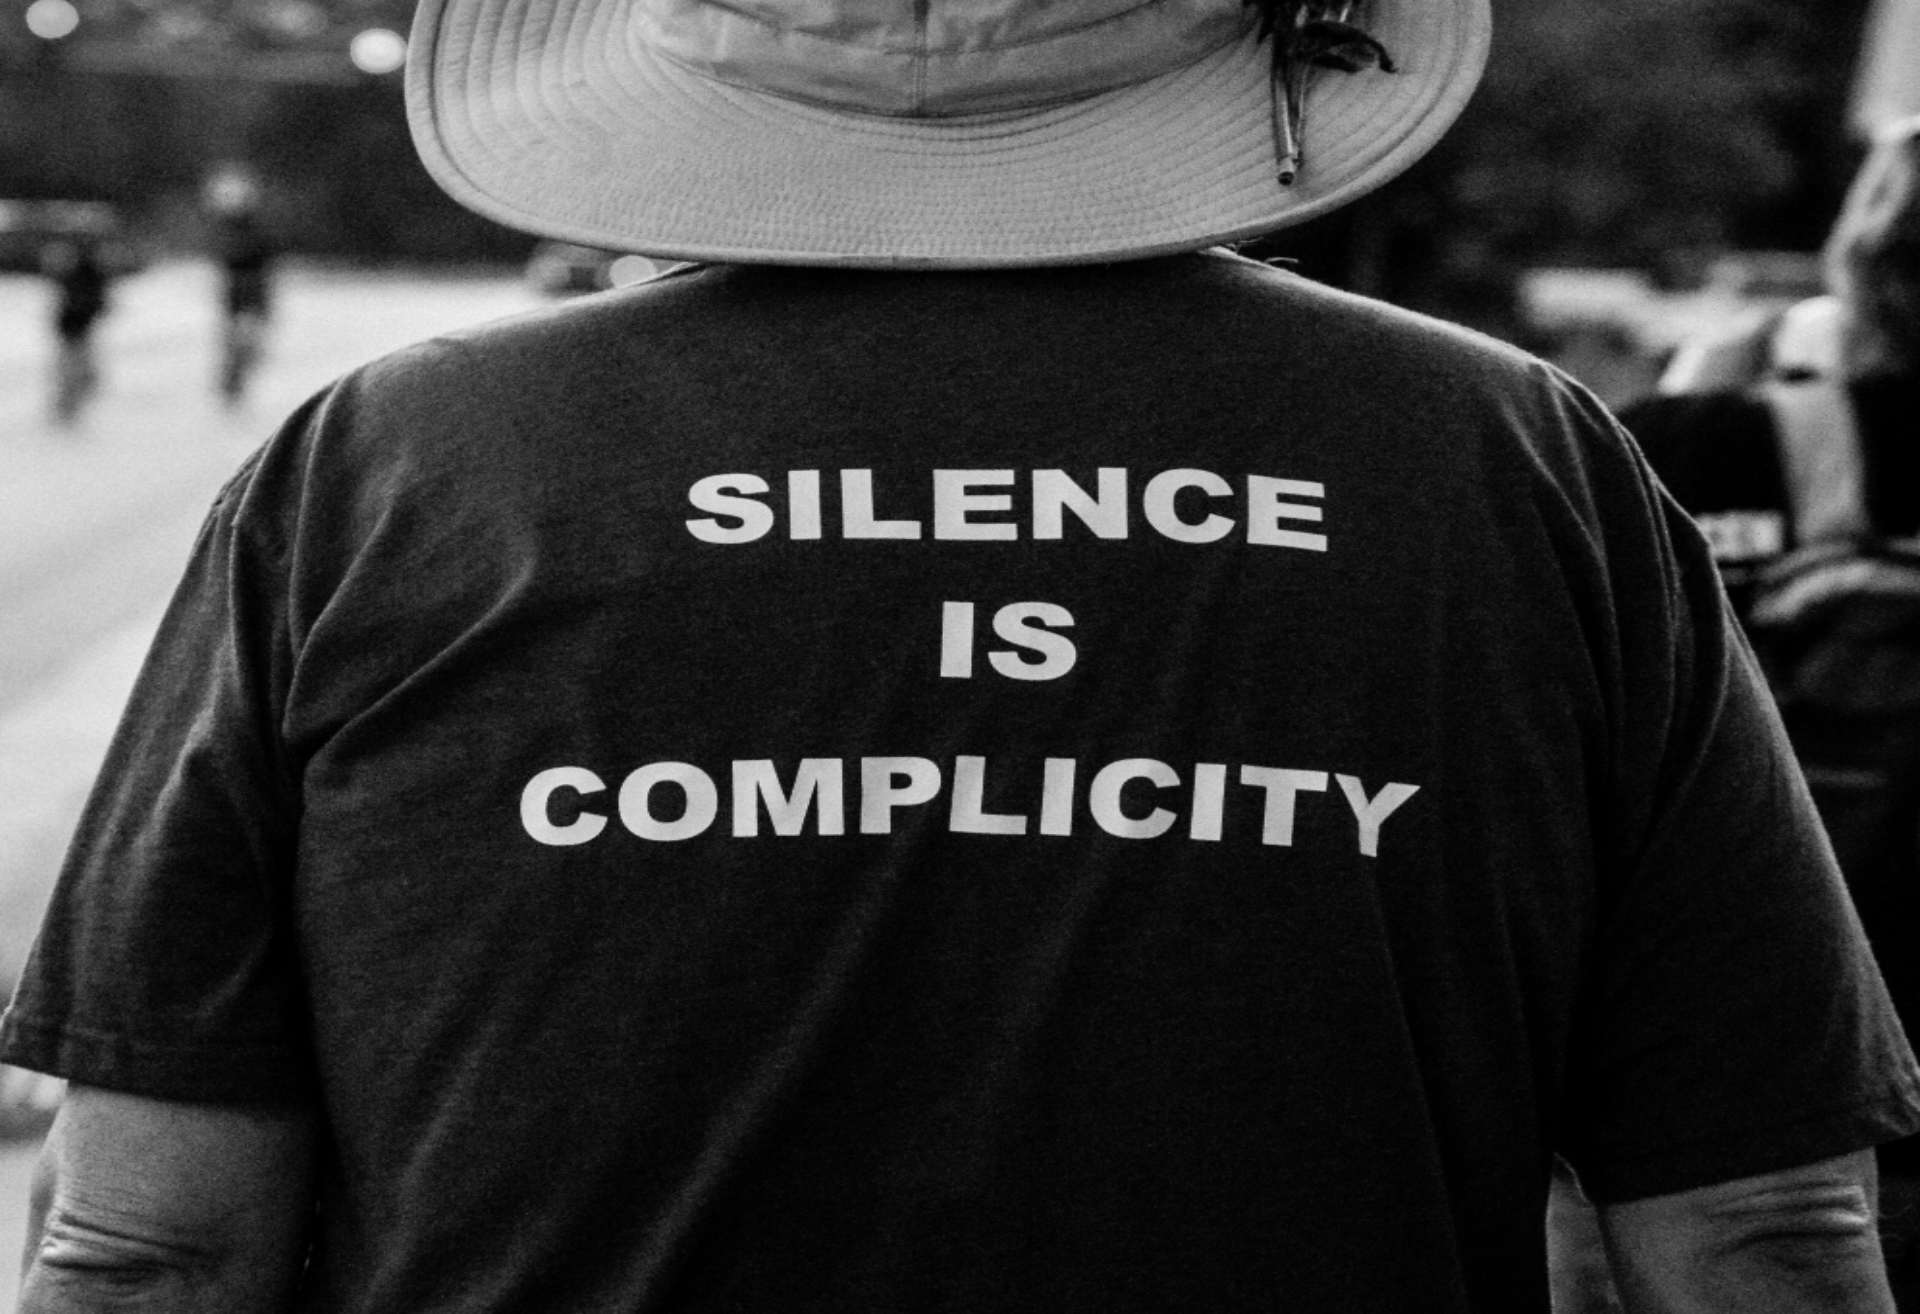 Silence is complicity